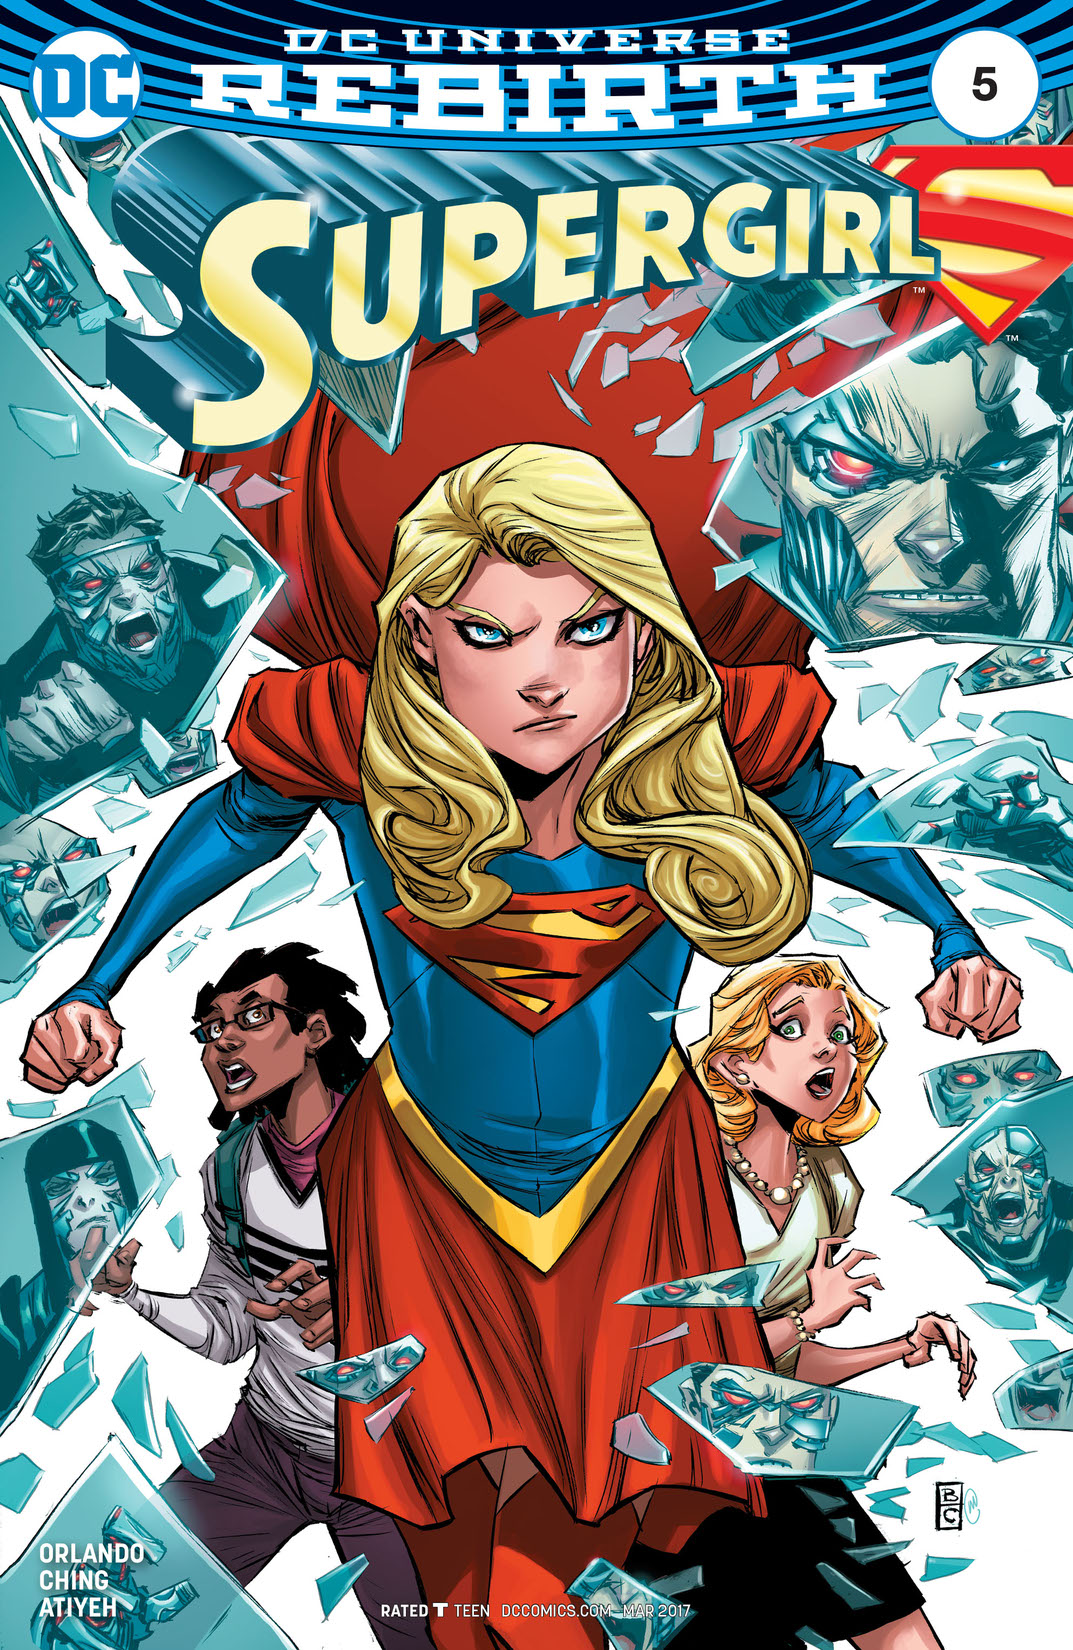 Supergirl (2016-) #5 preview images